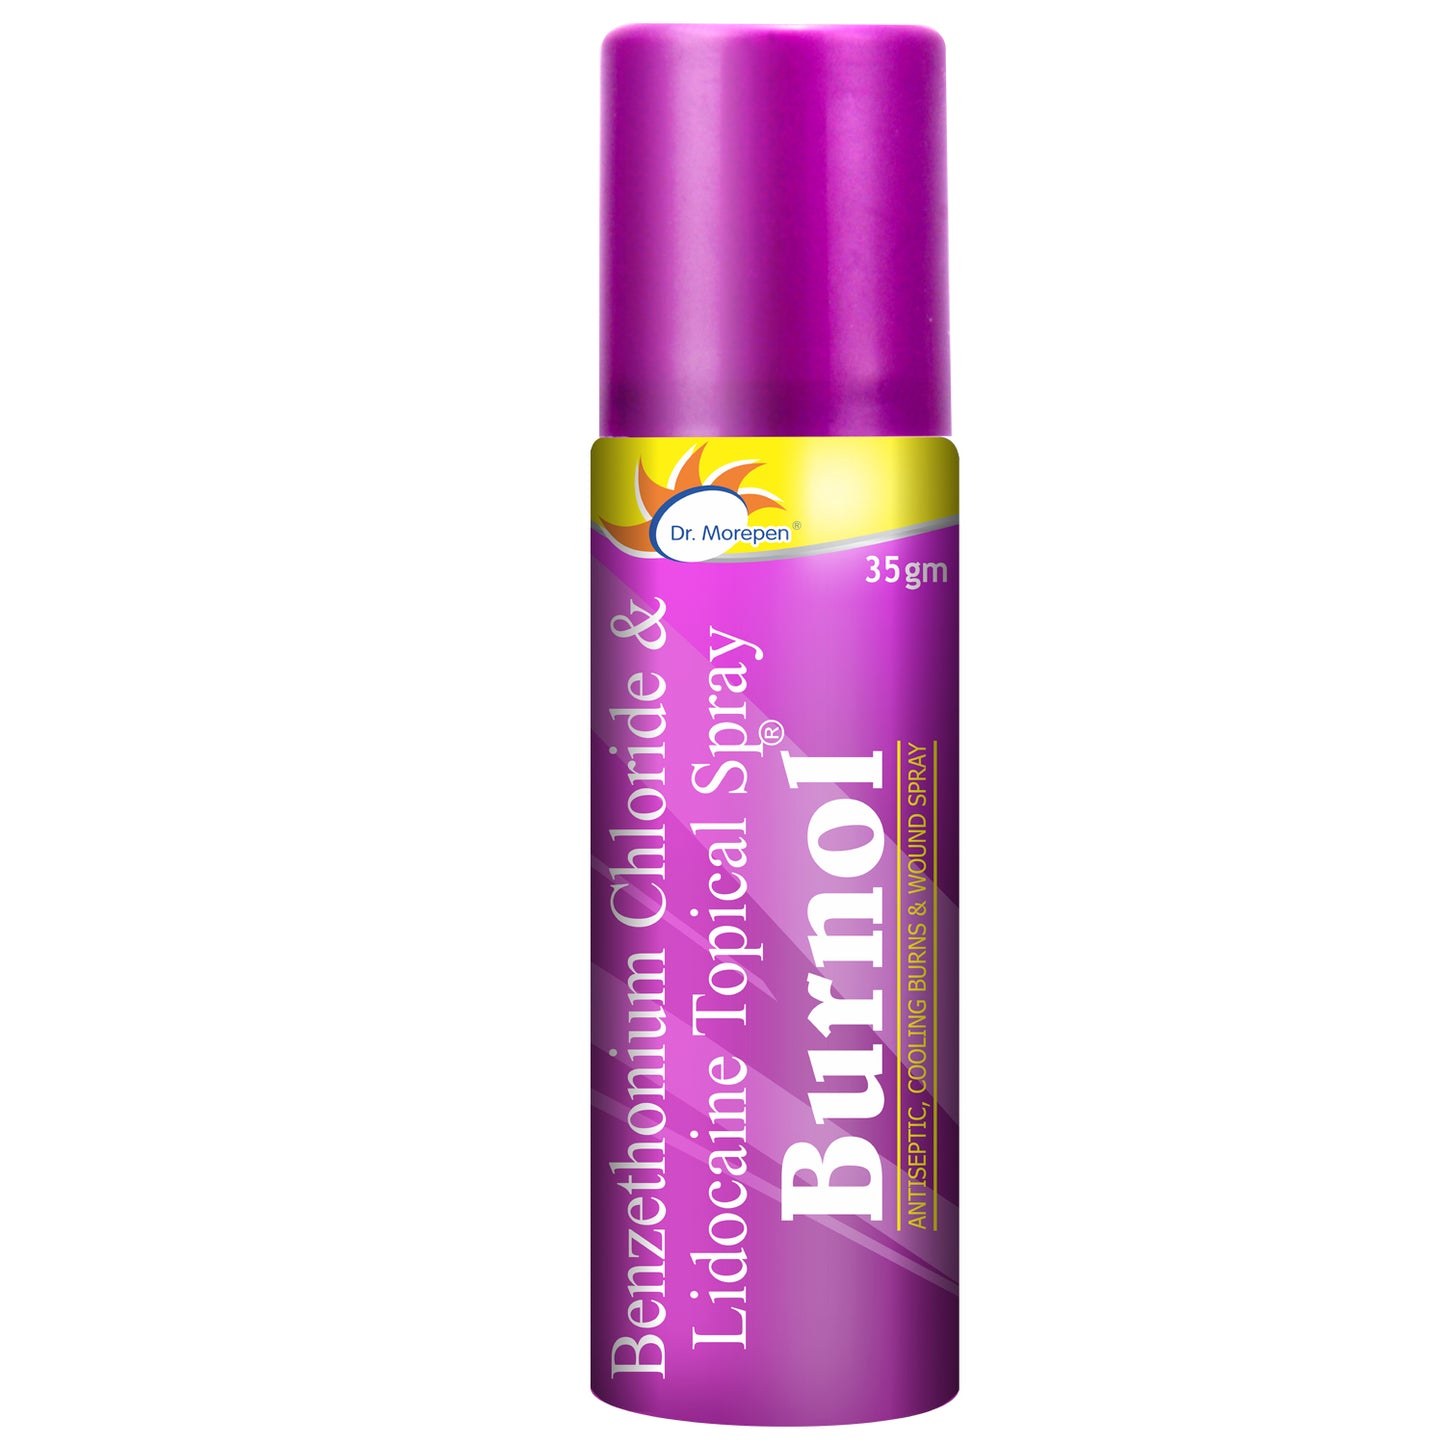 Burnol Spray (35gm)- Instant Relief /Prevents Infection